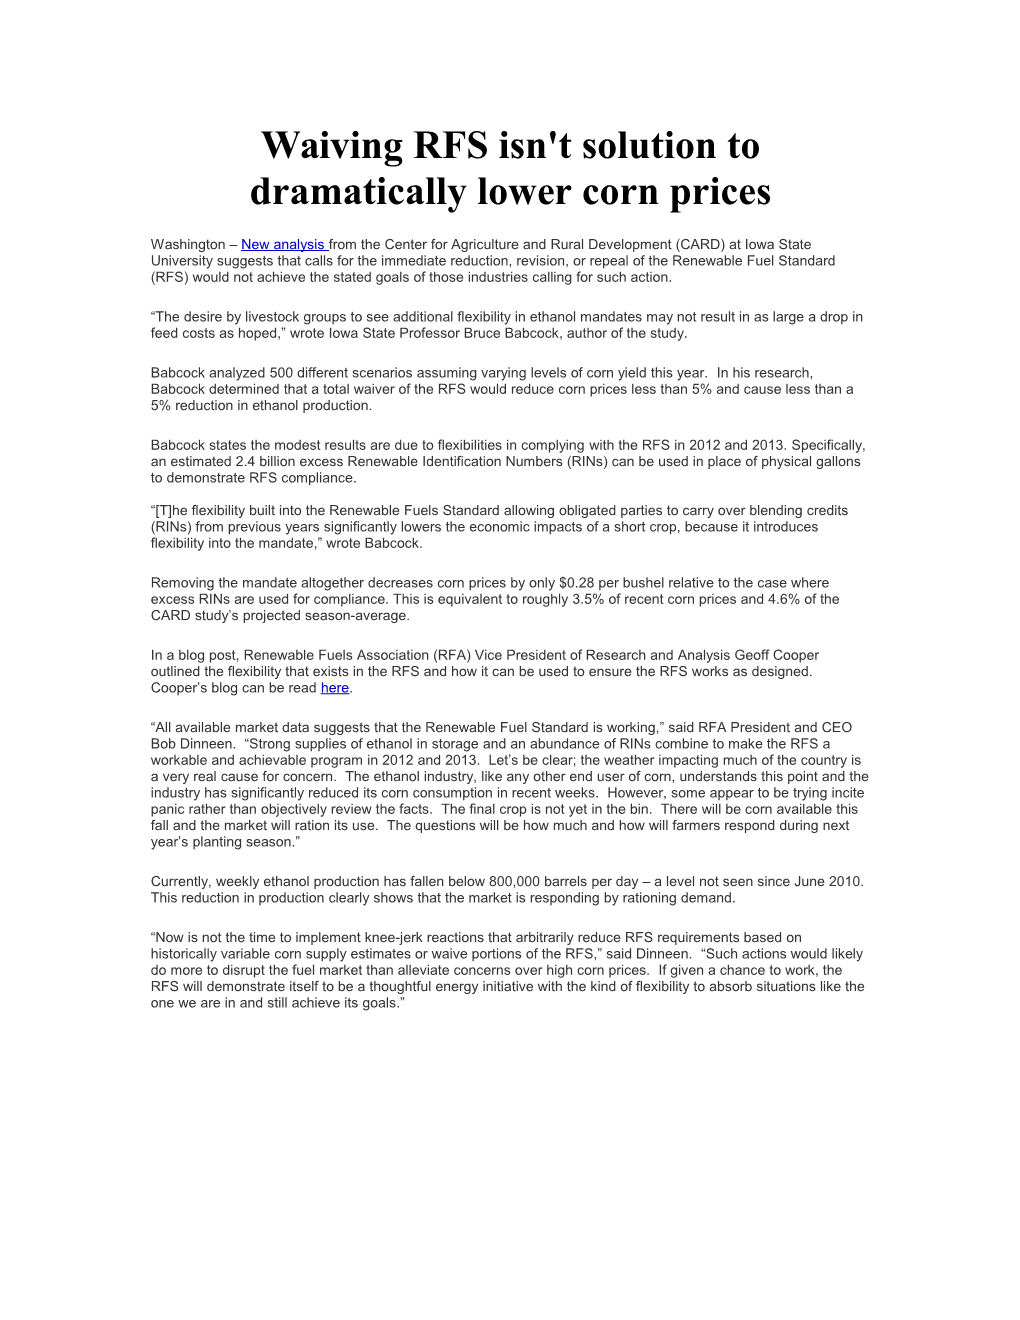 Waiving RFS Isn't Solution to Dramatically Lower Corn Prices